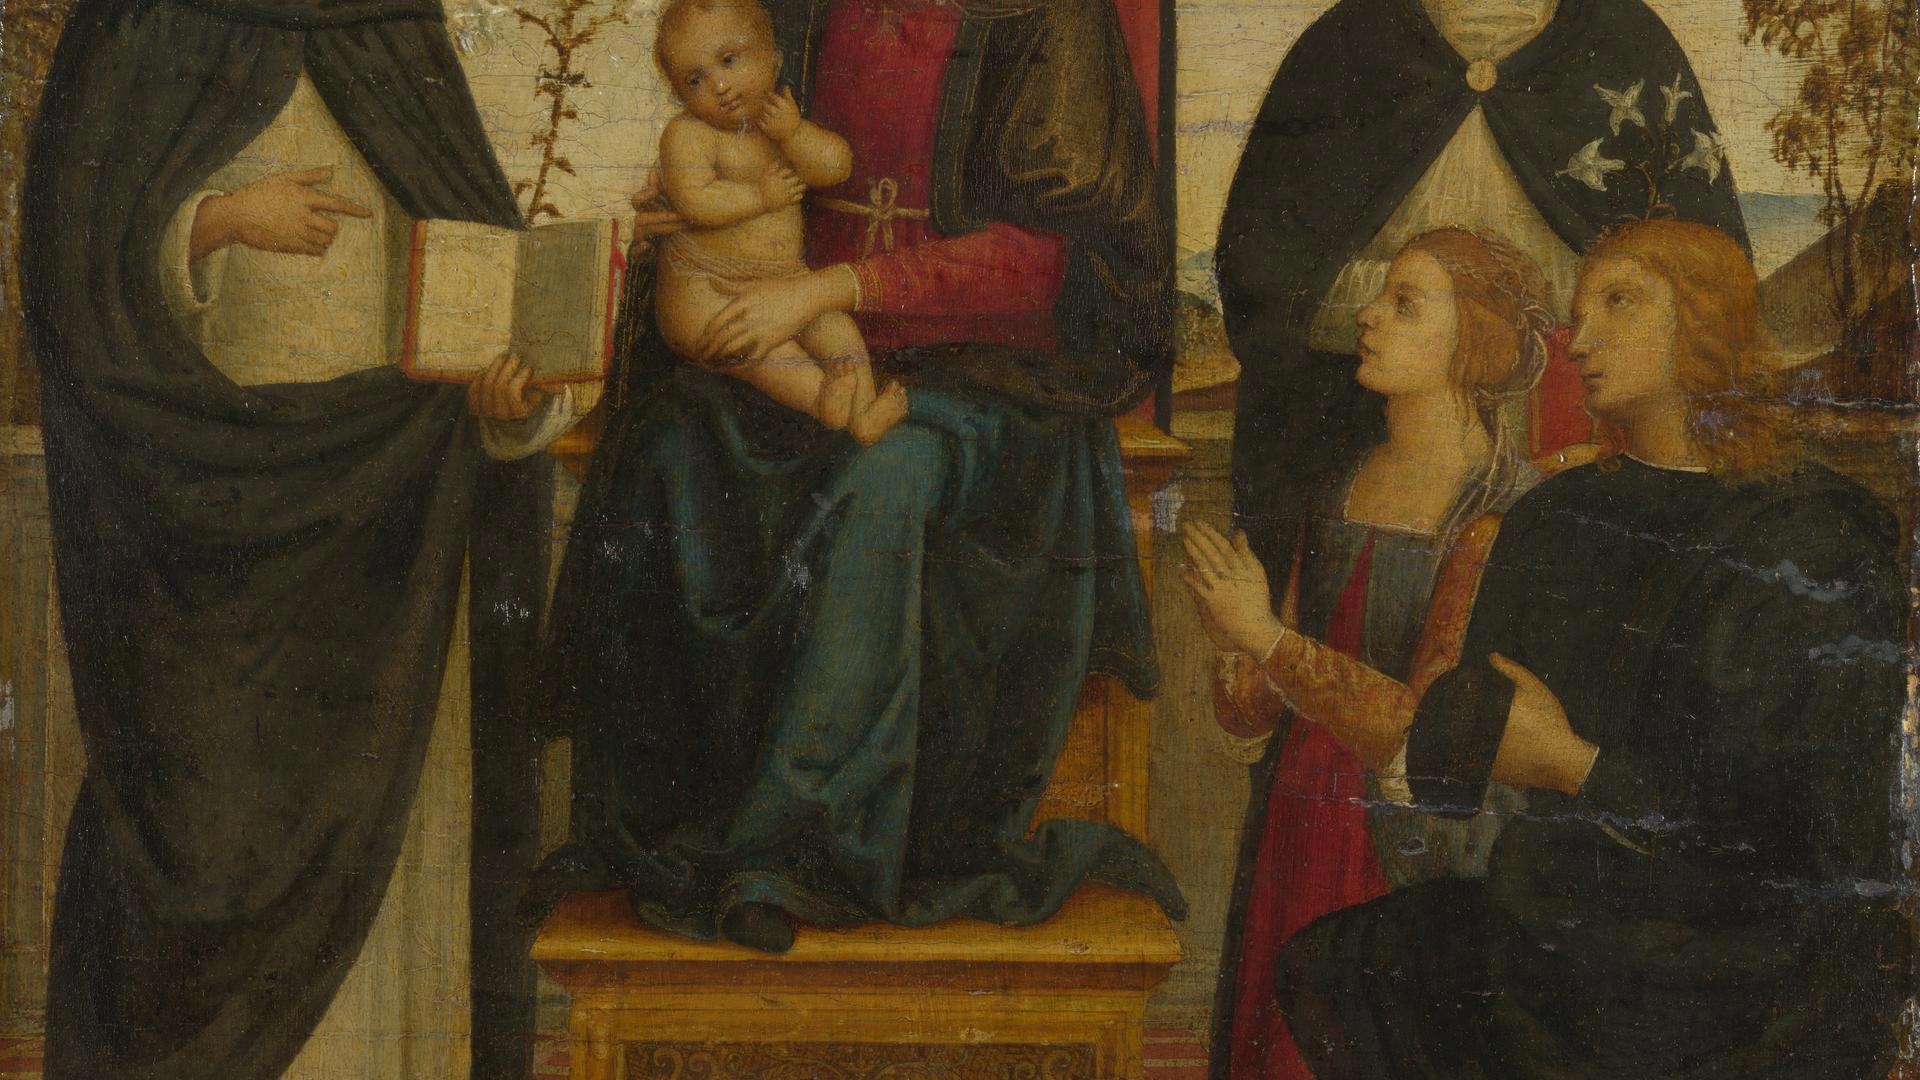 The Virgin and Child with Saints by Follower of Pietro Perugino